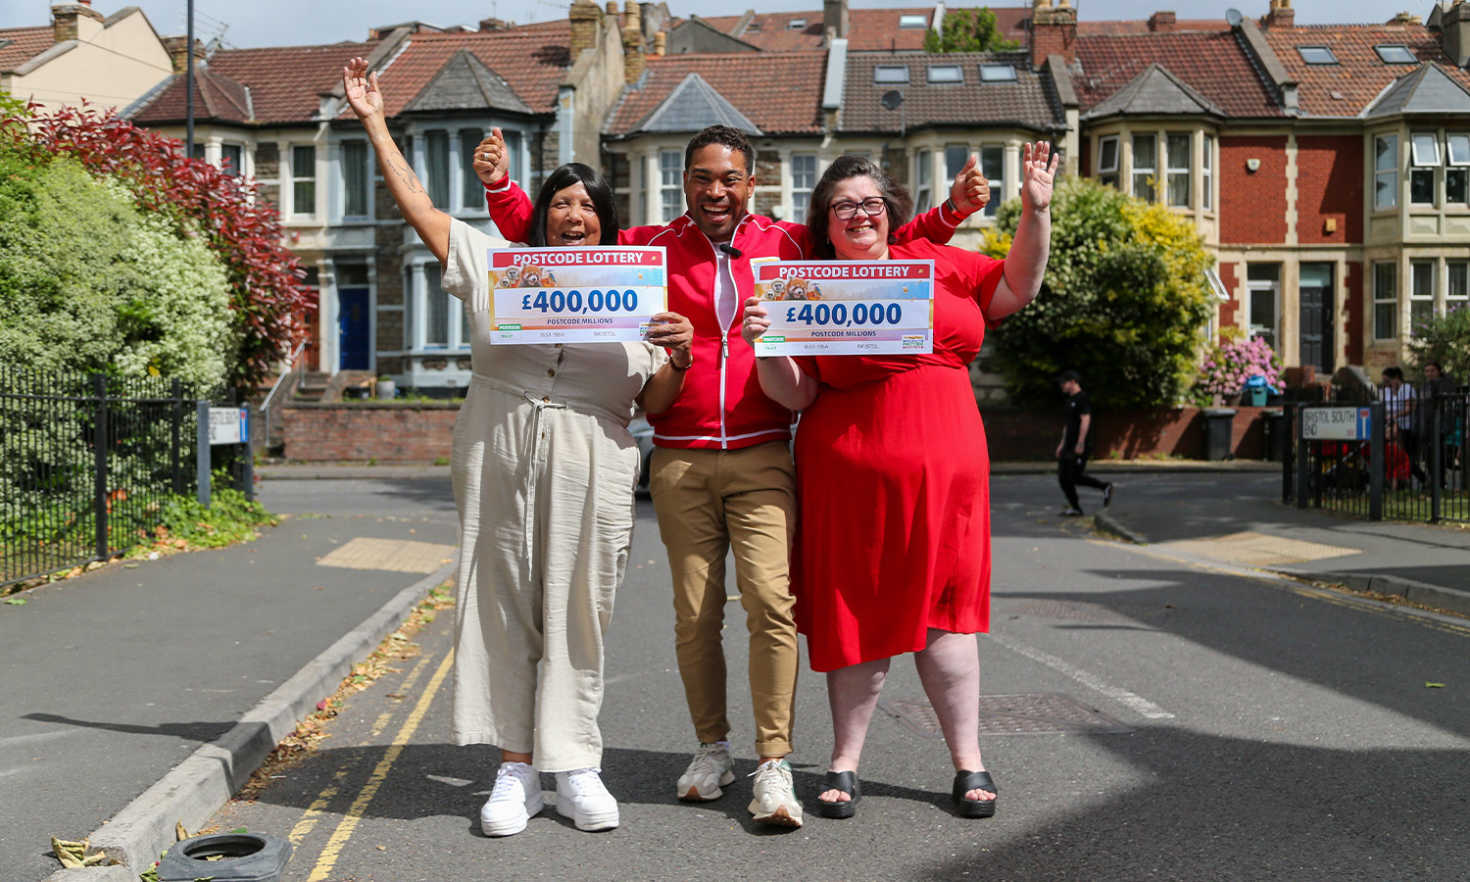 An incredible £3.2 Million has landed in Bristol in our latest Postcode Millions